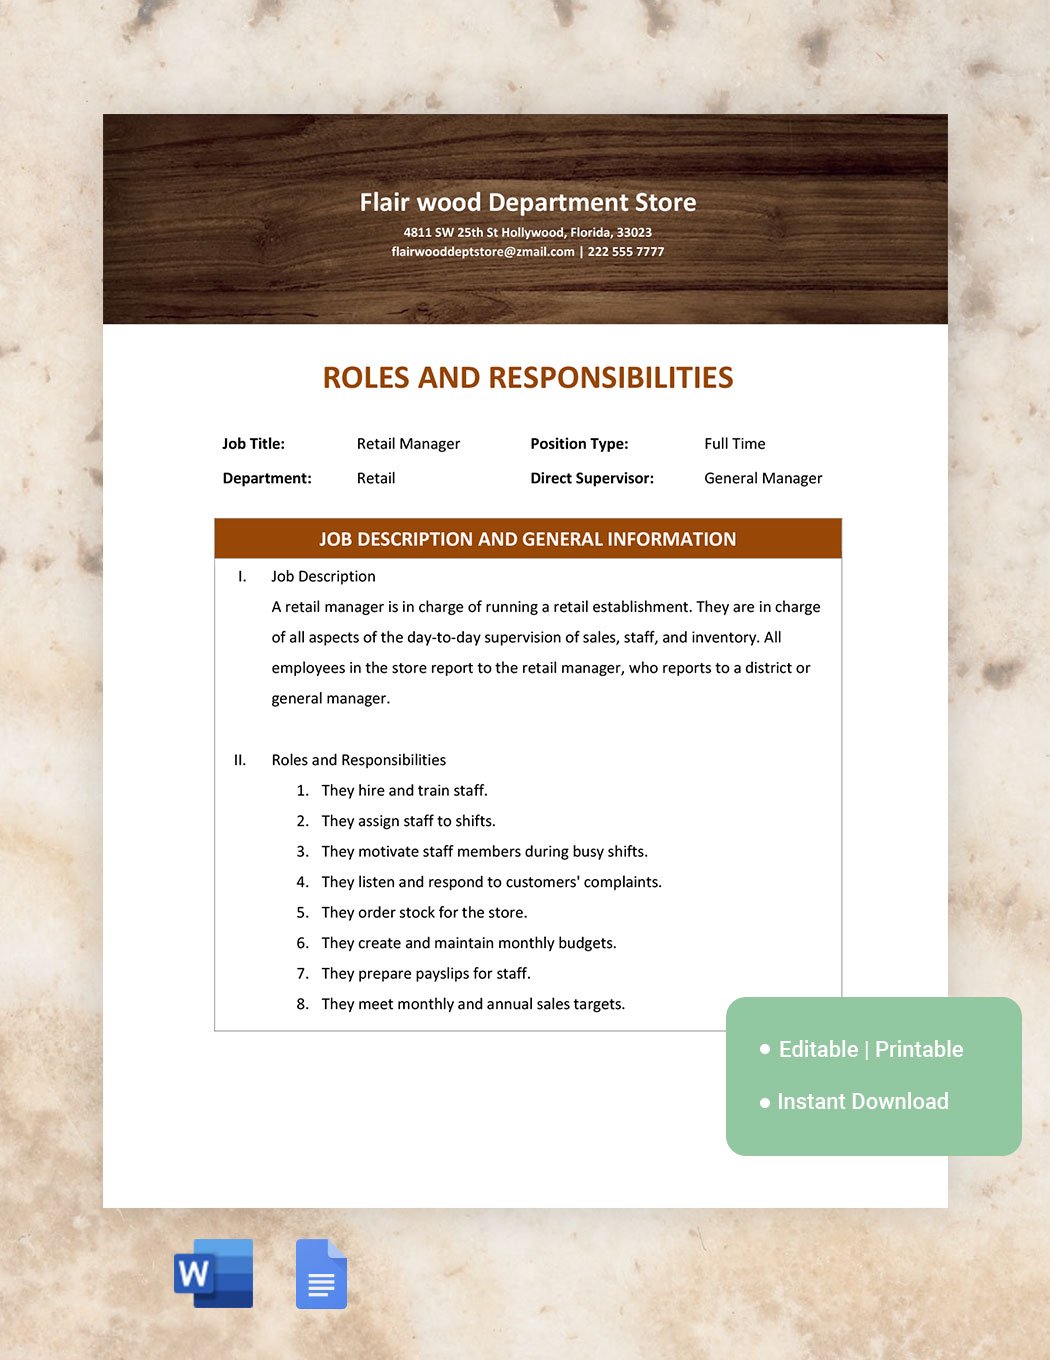 Job Roles And Responsibilities Template in Word, Google Docs